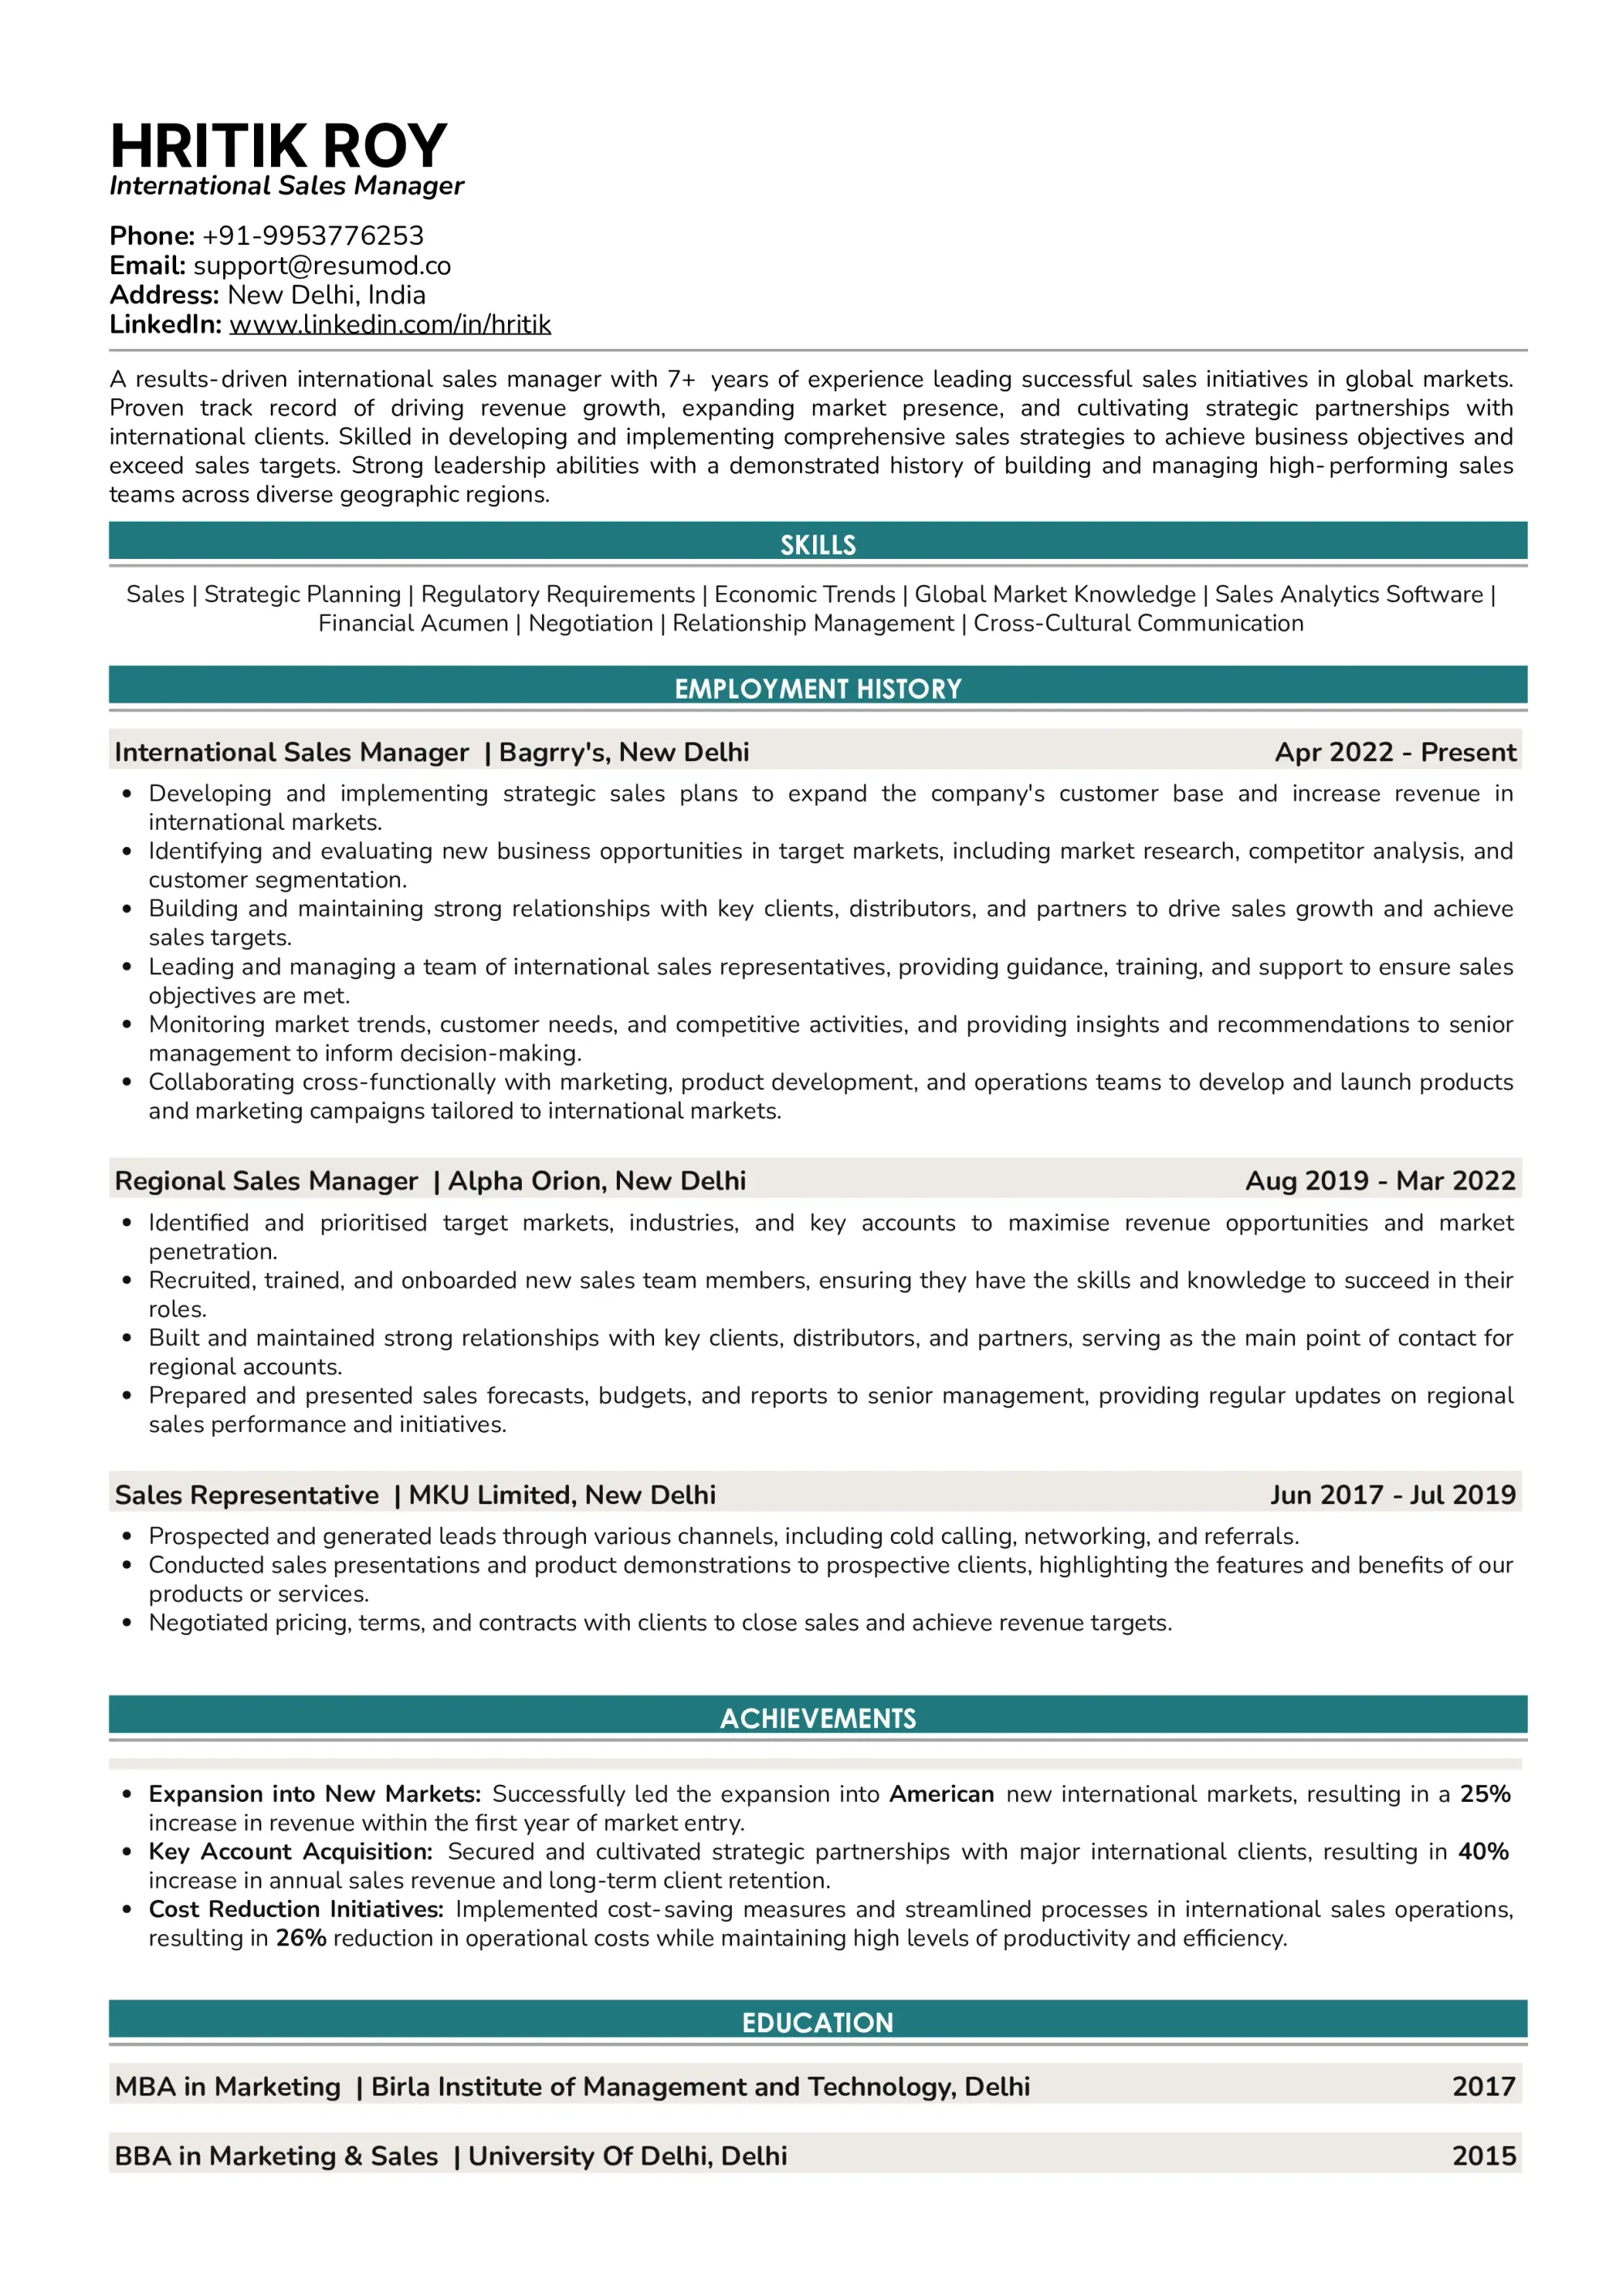 Resume of international sales manager in text format